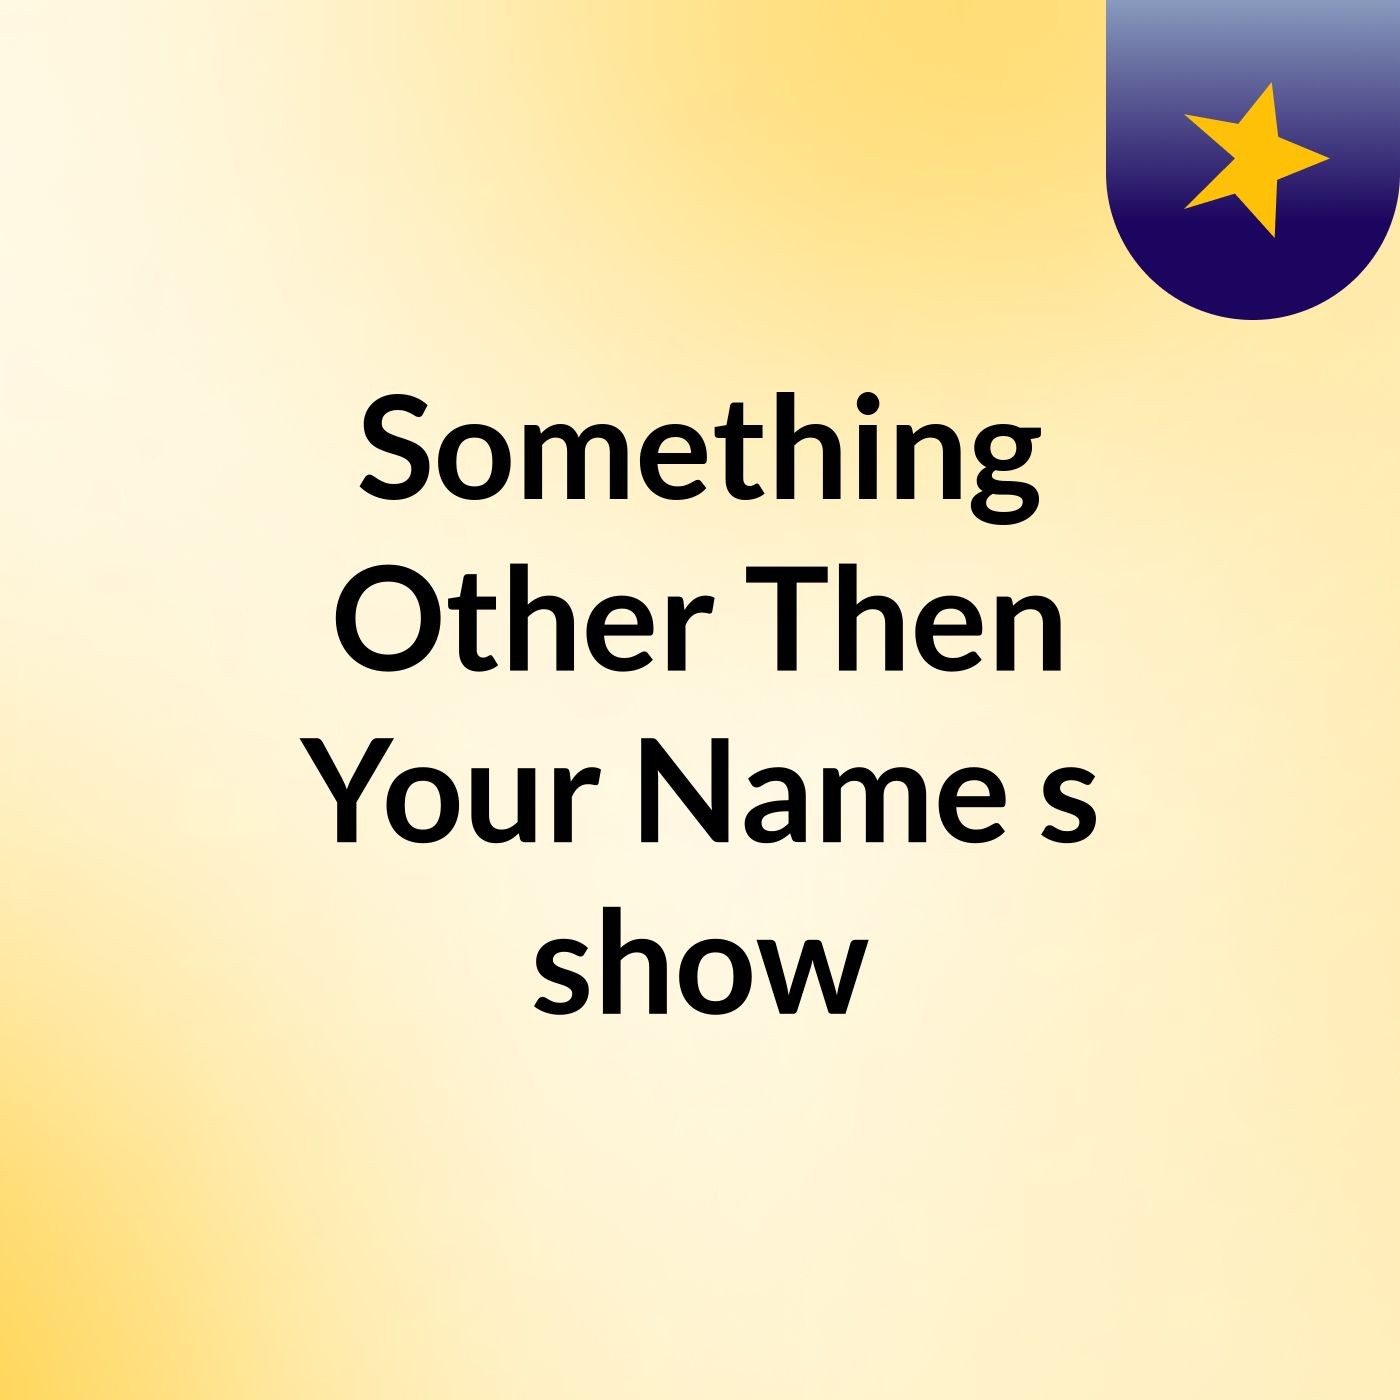 Episode 6 - Something Other Then Your Name's show